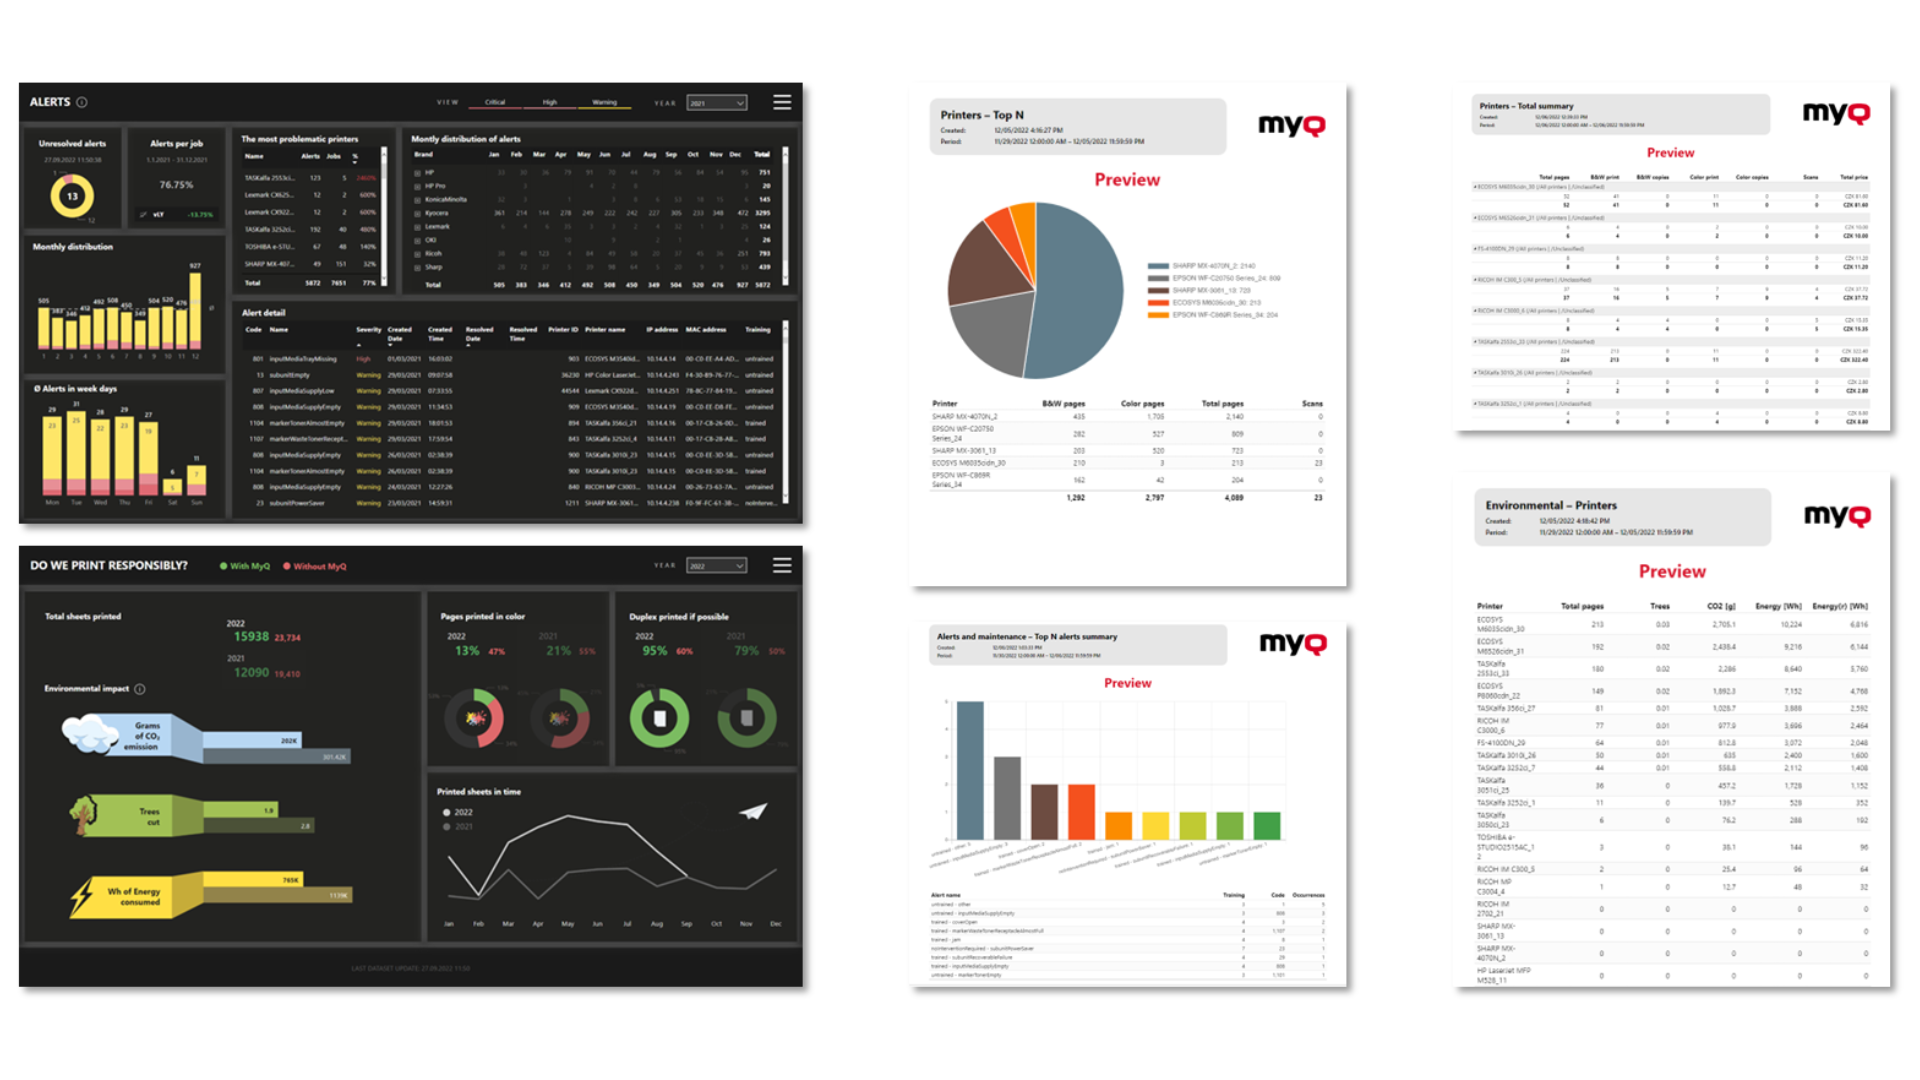 MyQ X provides a wide variety of customizable reports and also supports seamless integration with business intelligence tools such as Power BI for visual data dashboards.